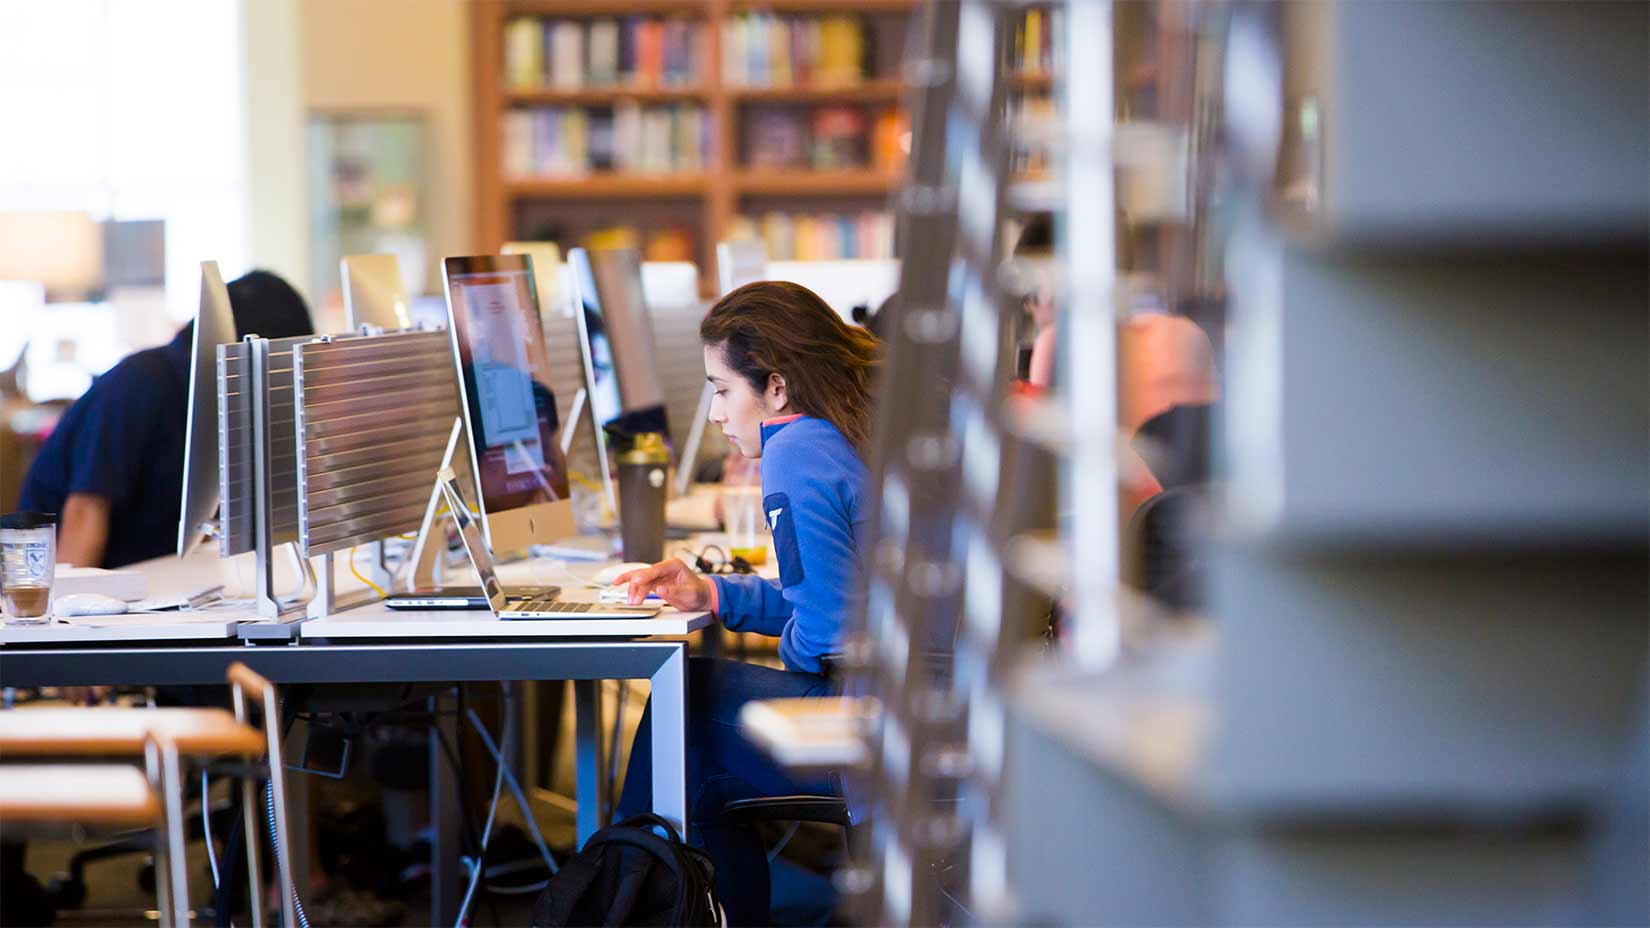 A student uses the Mac desktops in the library.